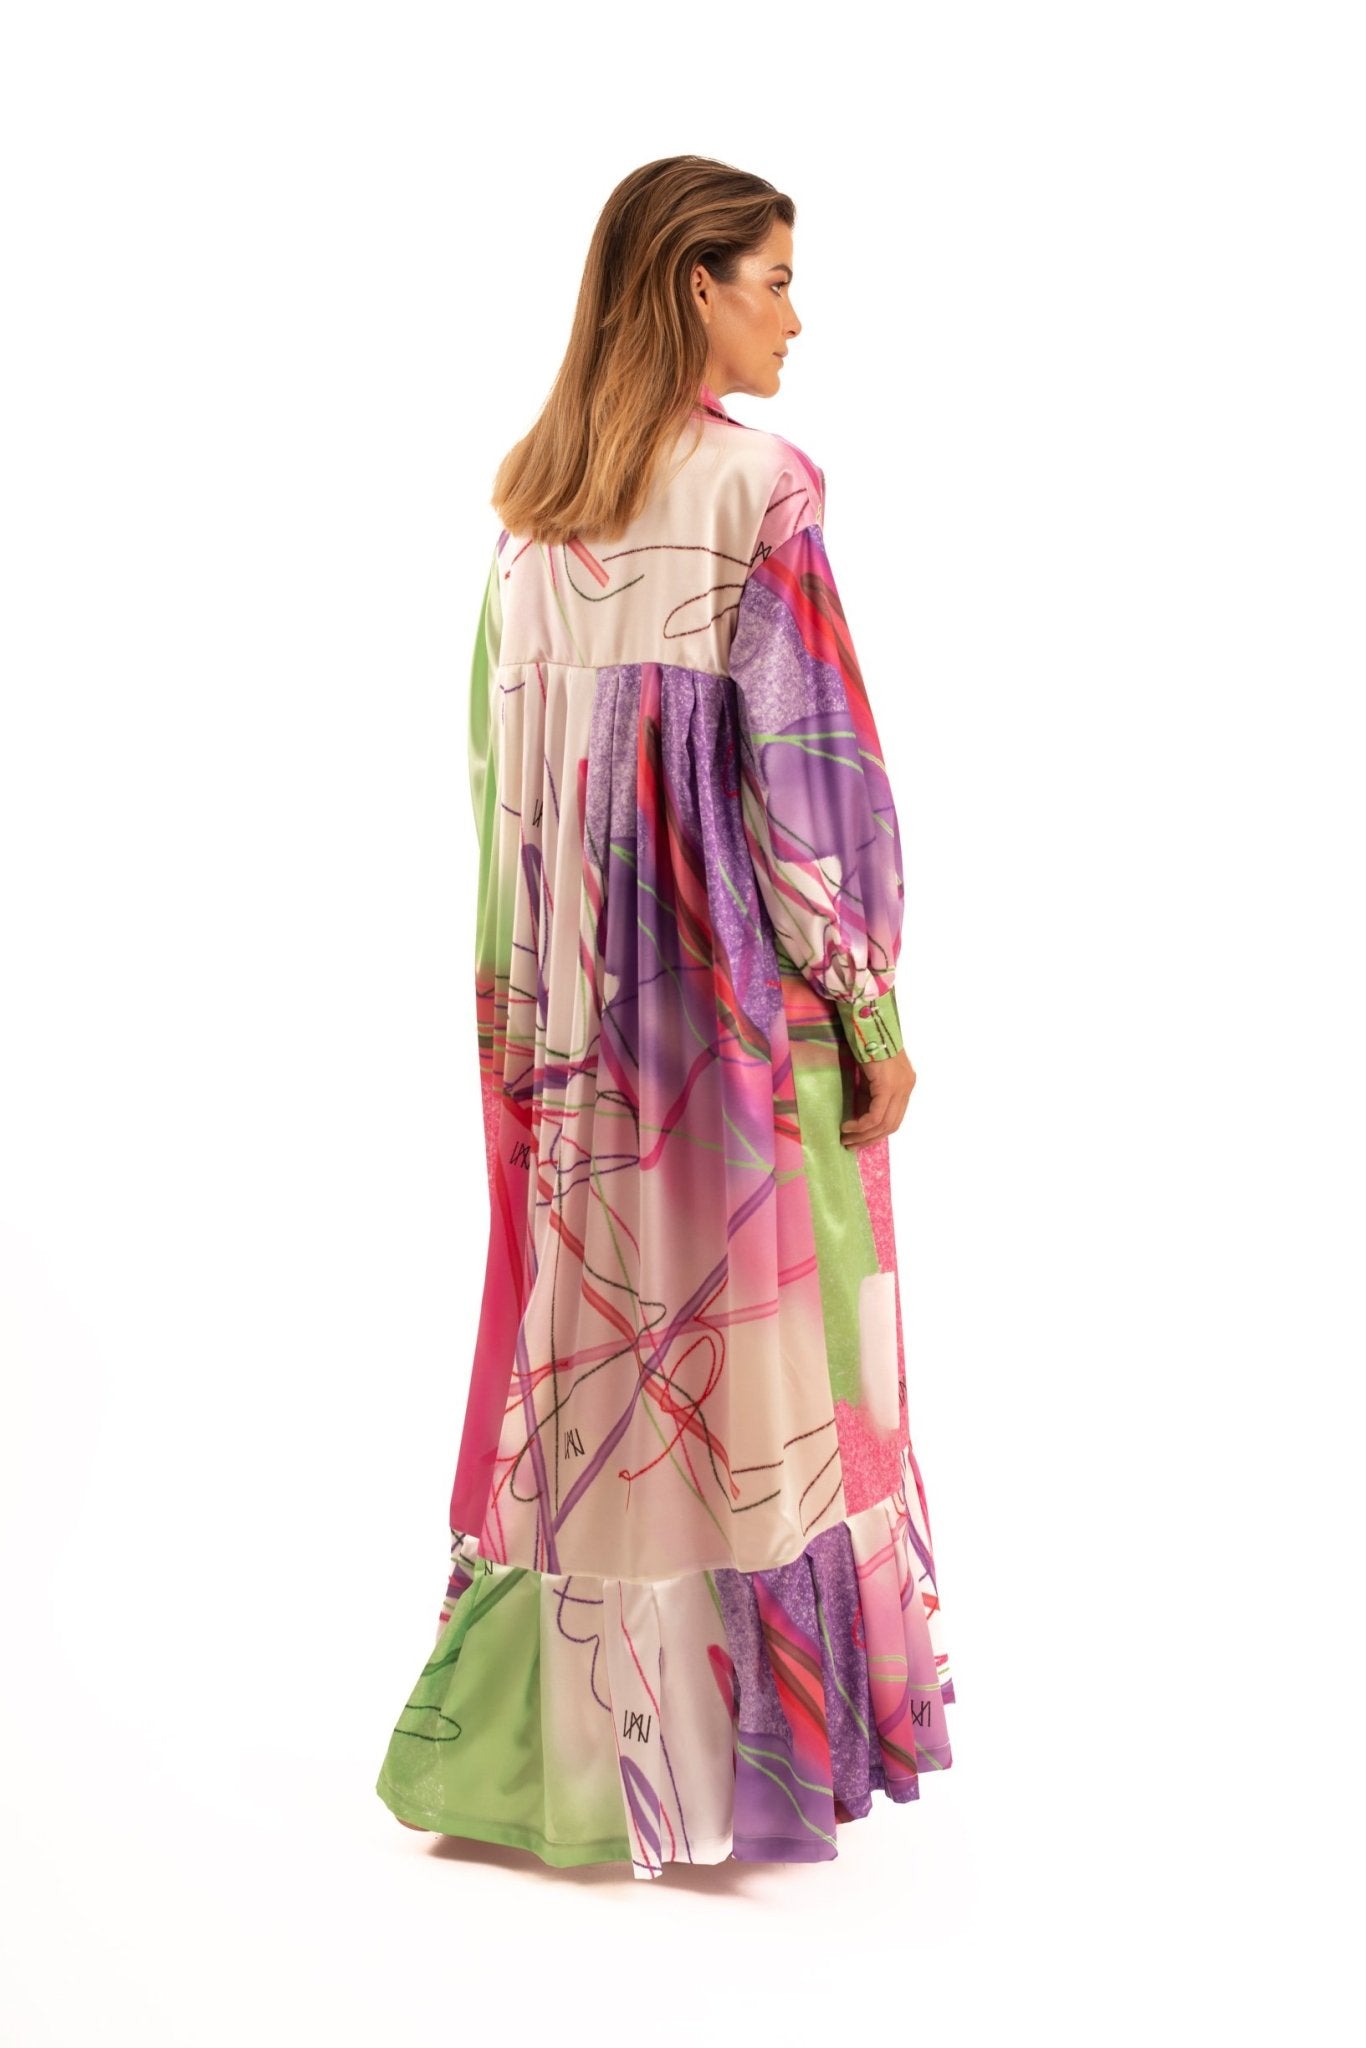 Printed Long NOPIN Dress - The Clothing LoungeNOPIN